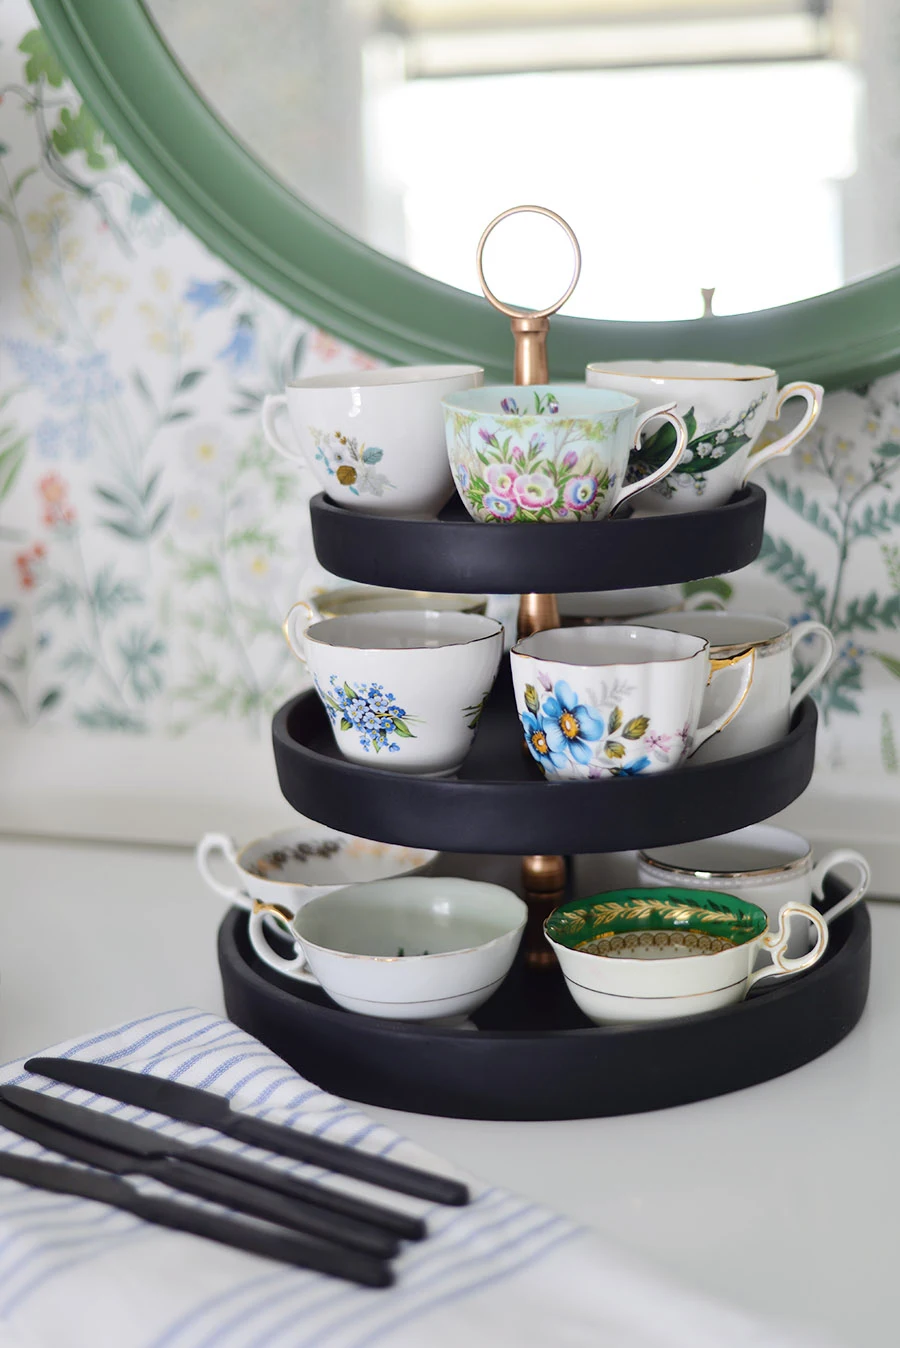 spring decorations for the home, Borastapeter flora white wallpaper, green round mirror, buffet display, teacups on tiered tray